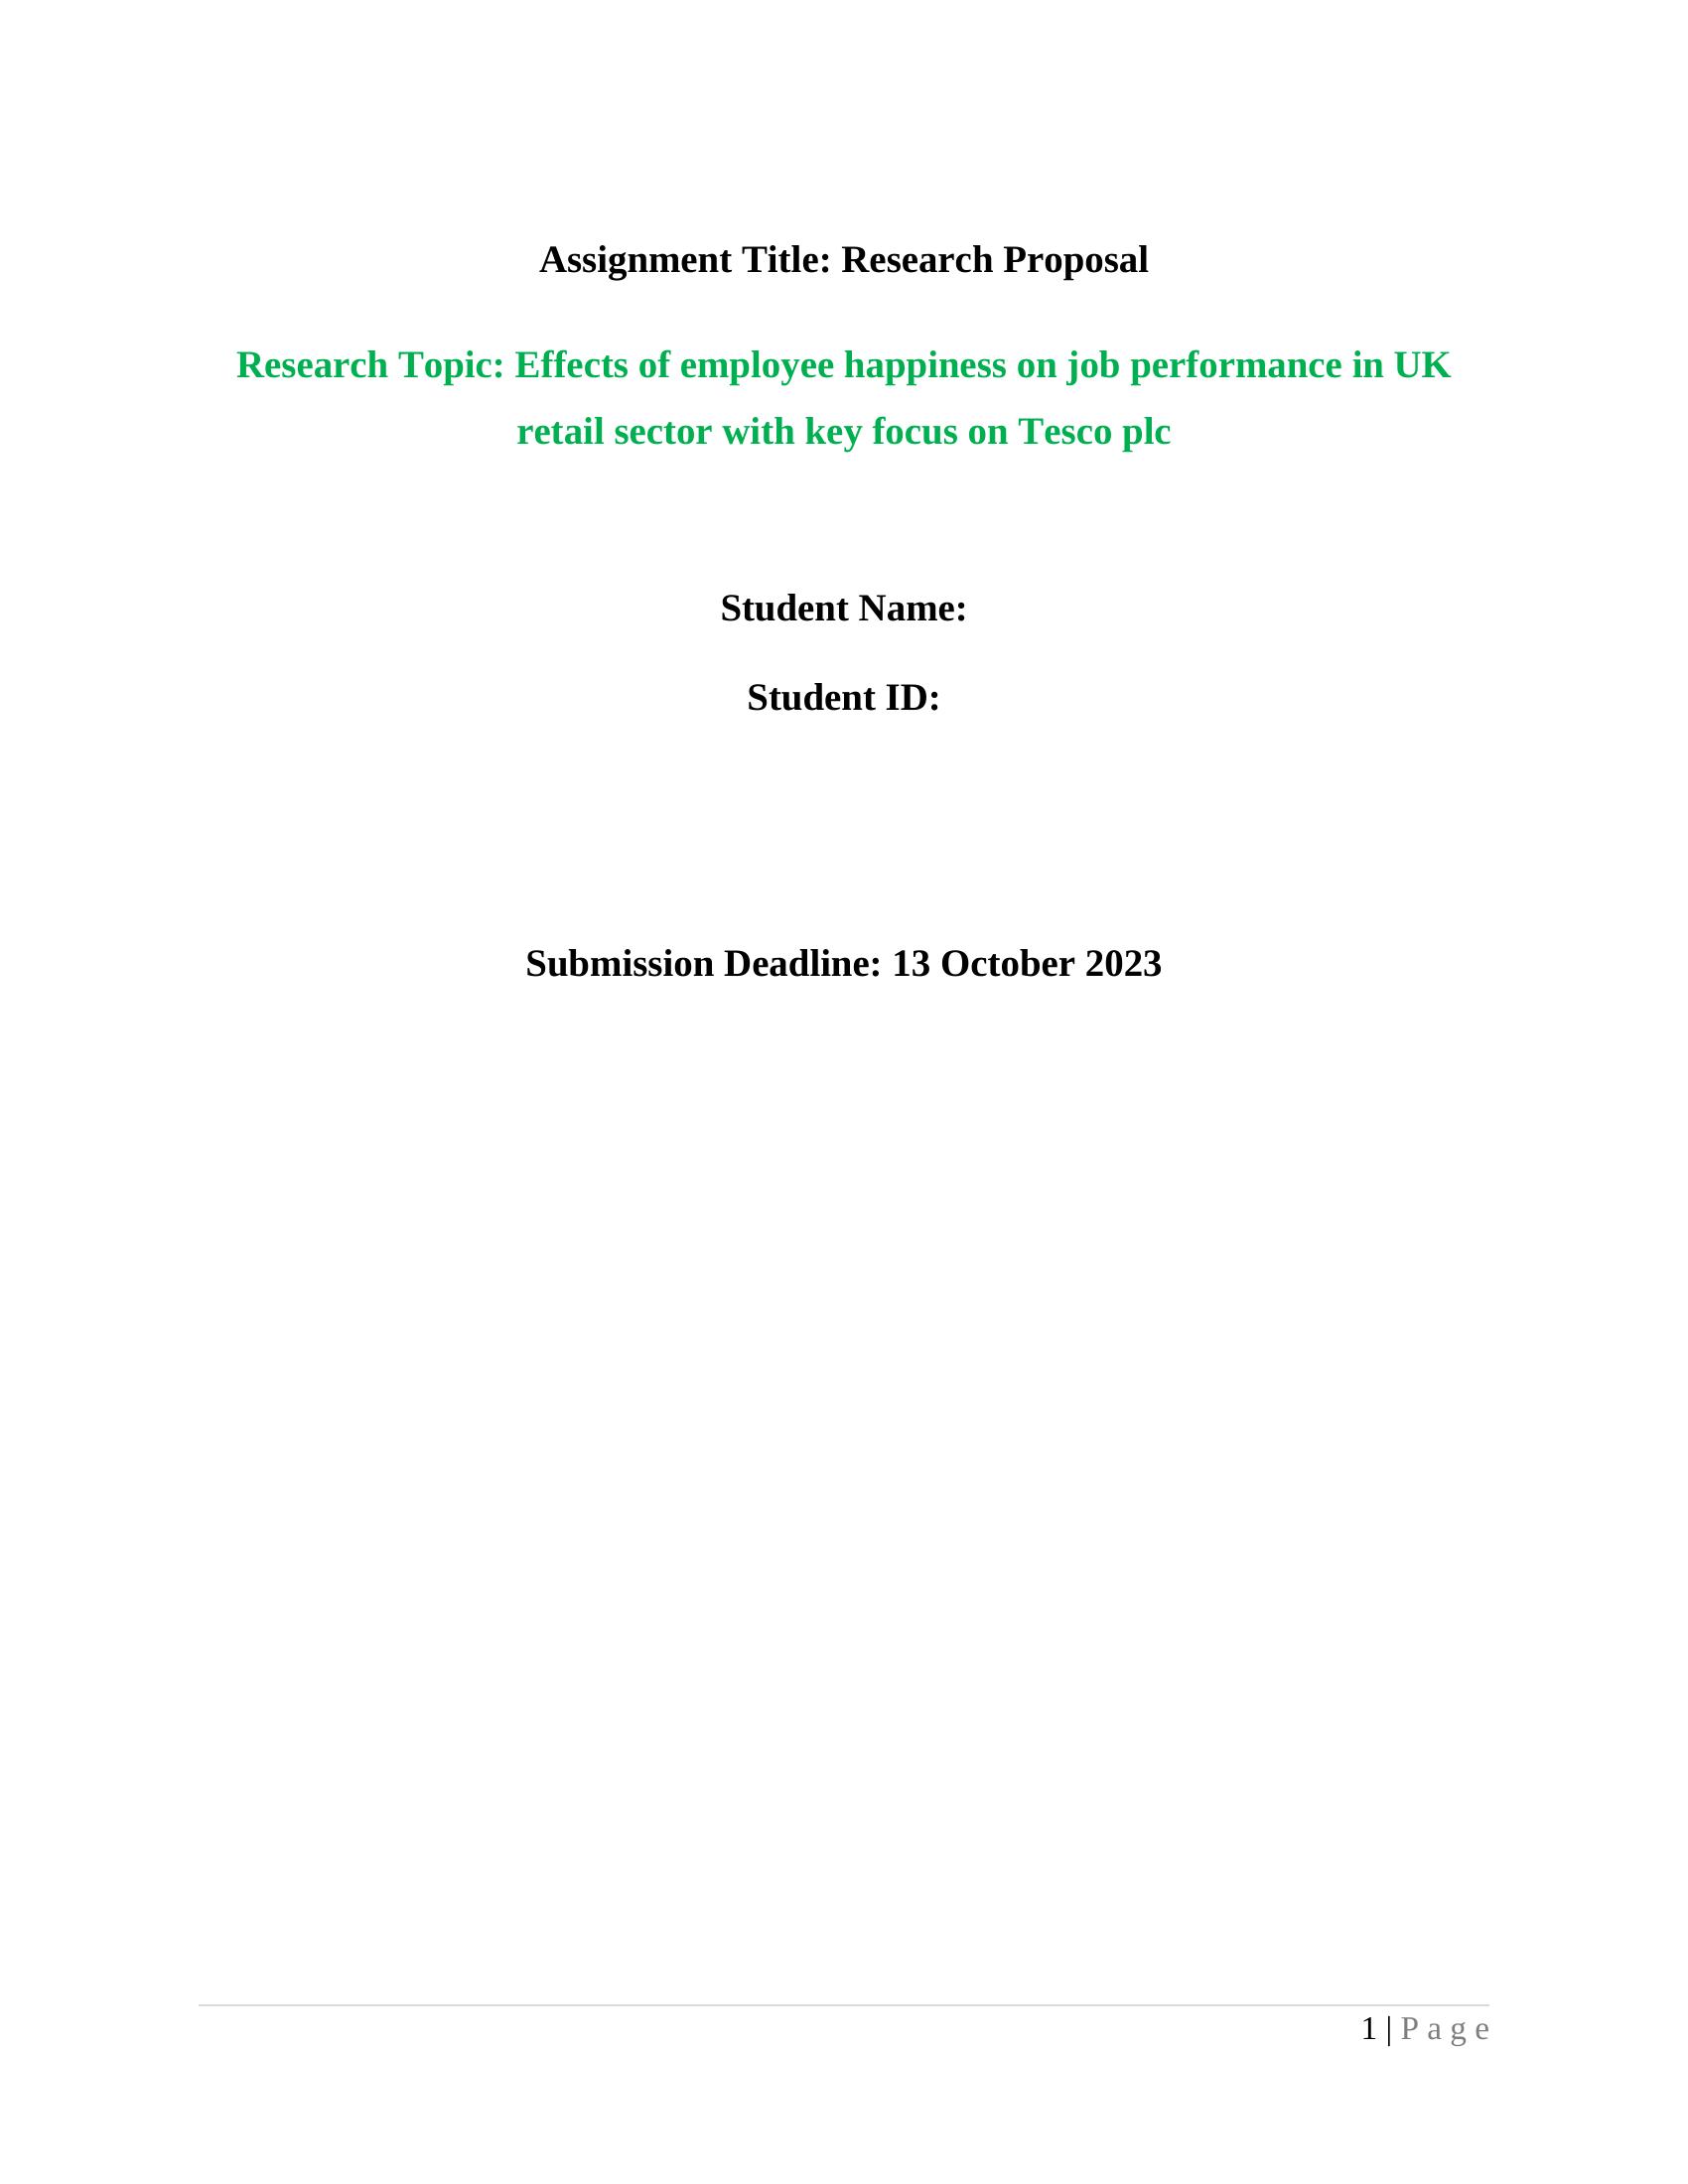 Research Proposal-Structure